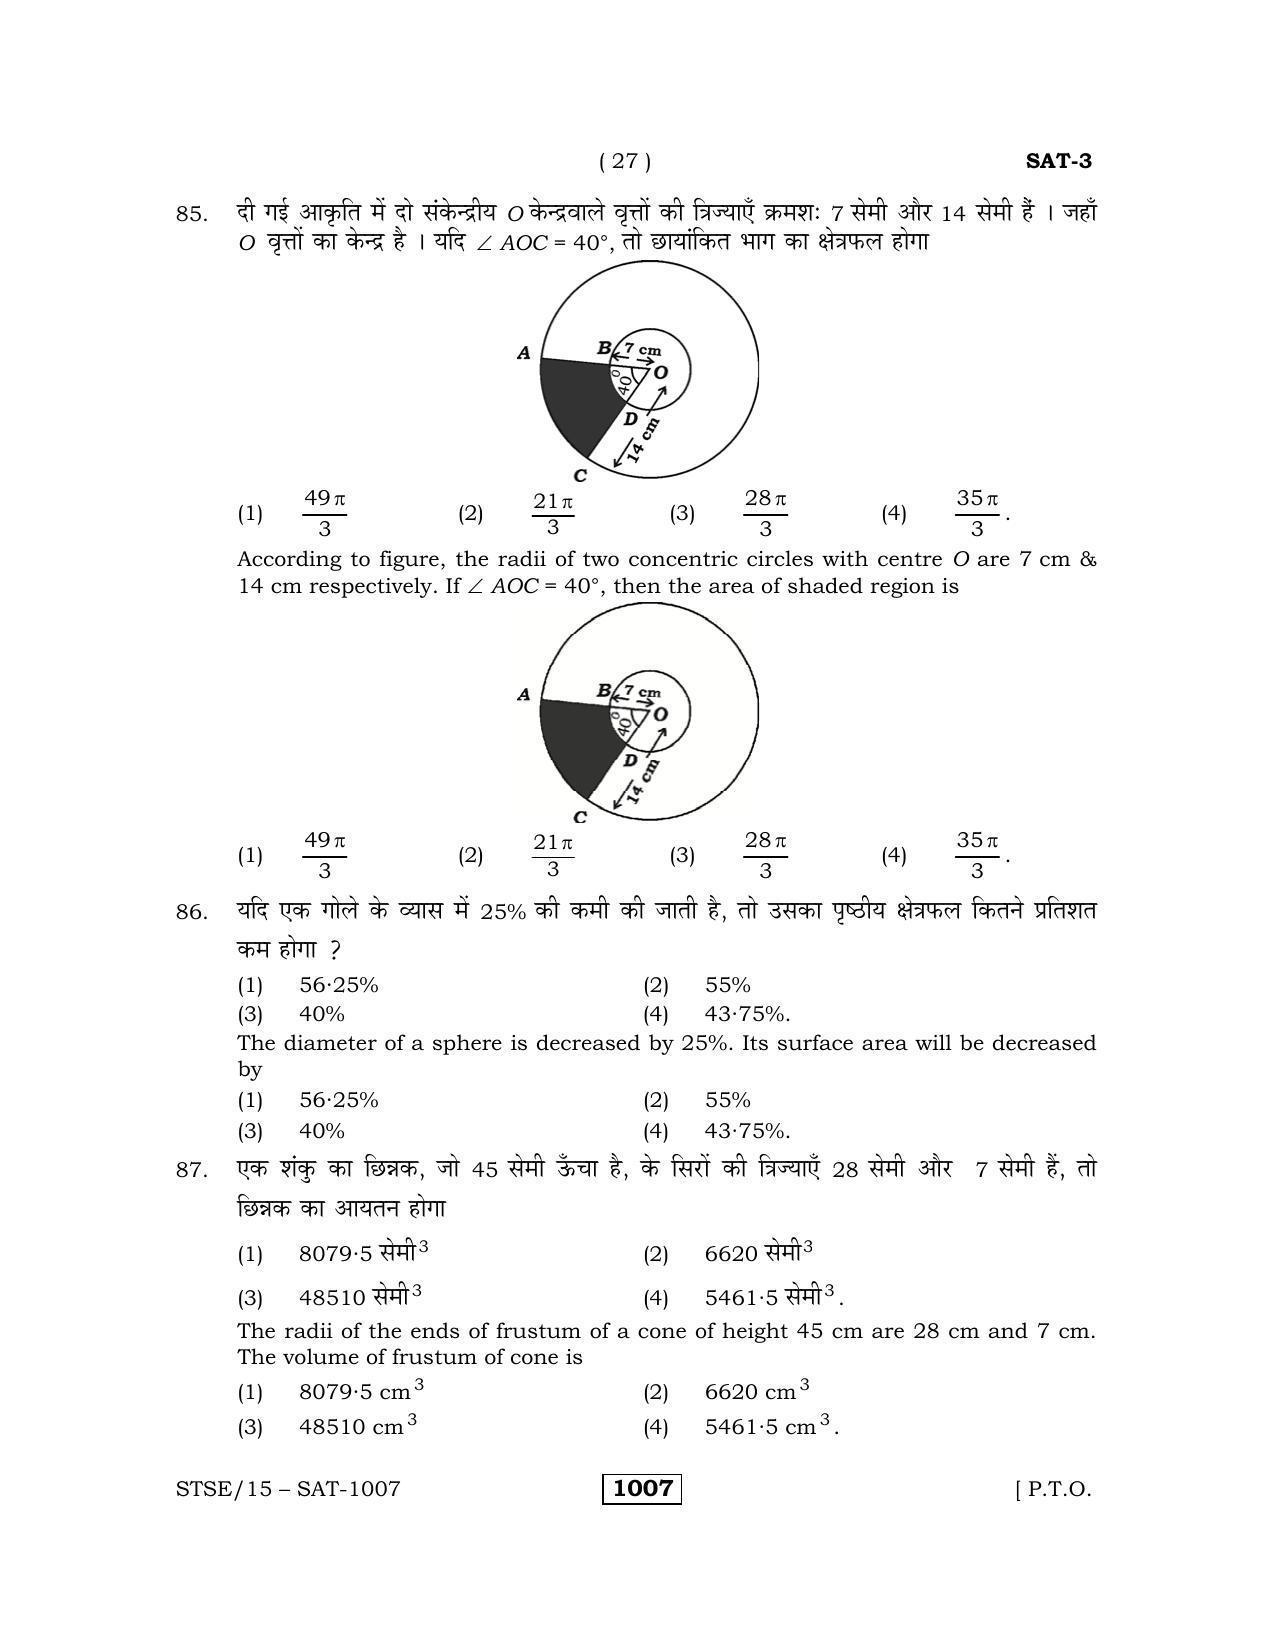 Rajasthan STSE Class 12 (Scholastic Aptitude Test) Question Paper 2015 - Page 27